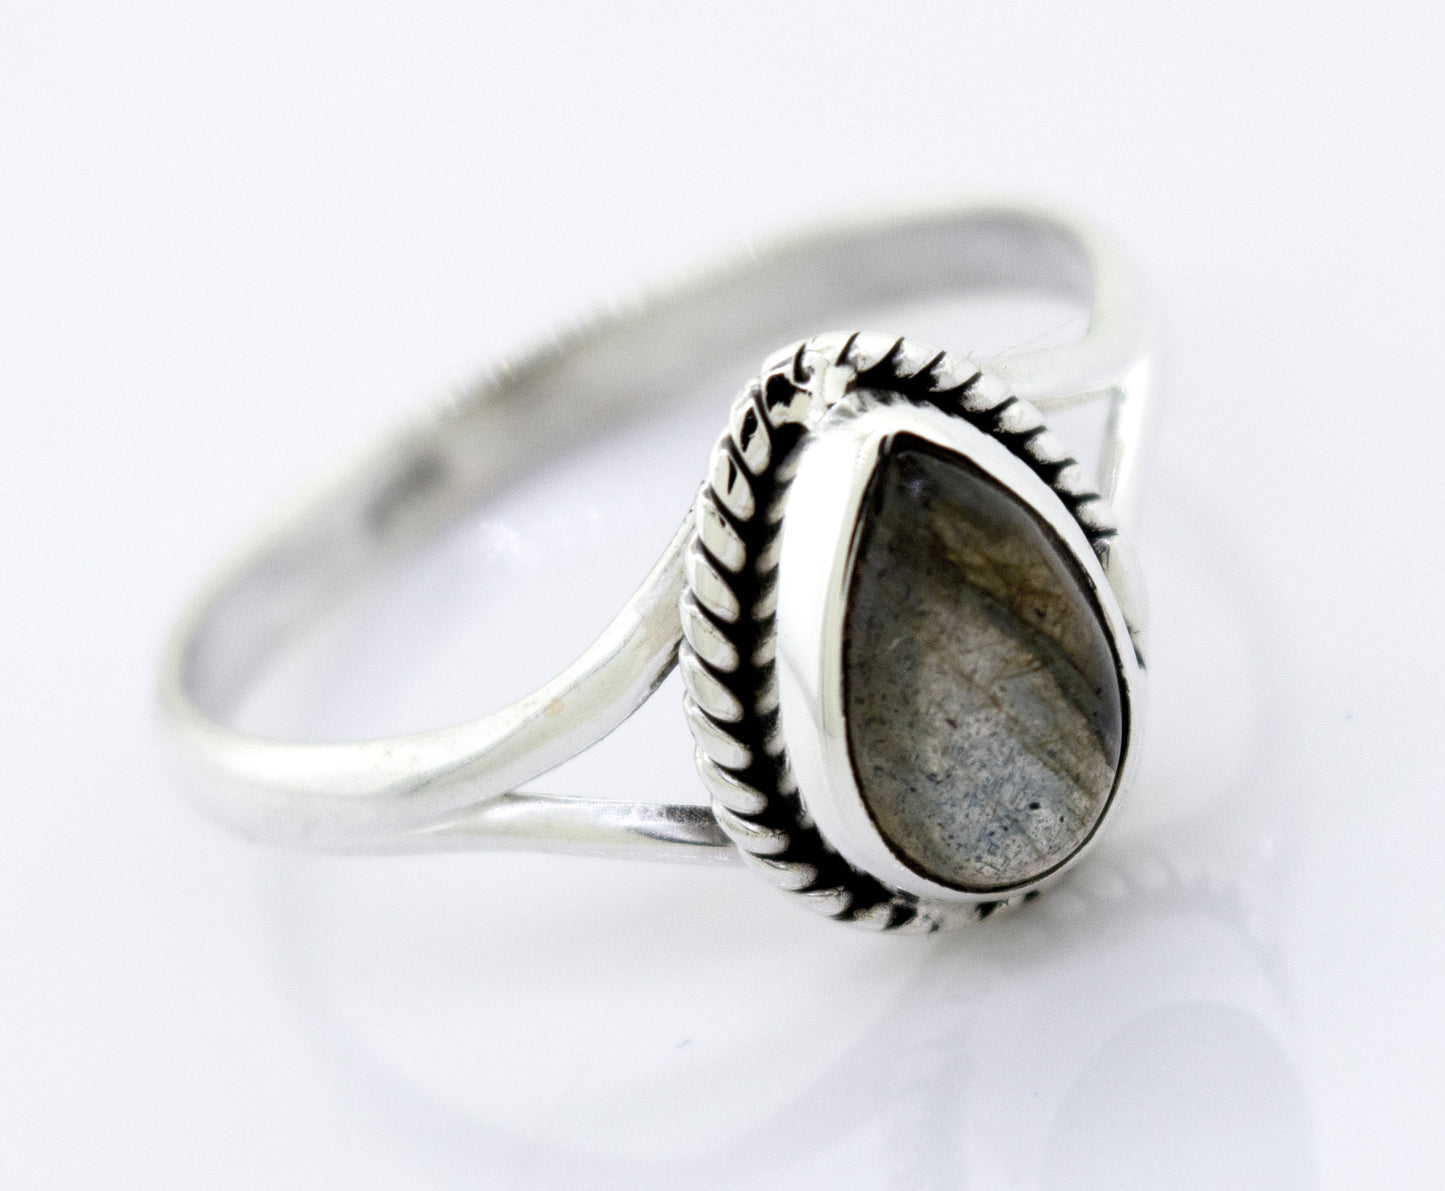 Vibrant teardrop shape stone ring with an oval gray gemstone set in a detailed band, displayed against a white background.